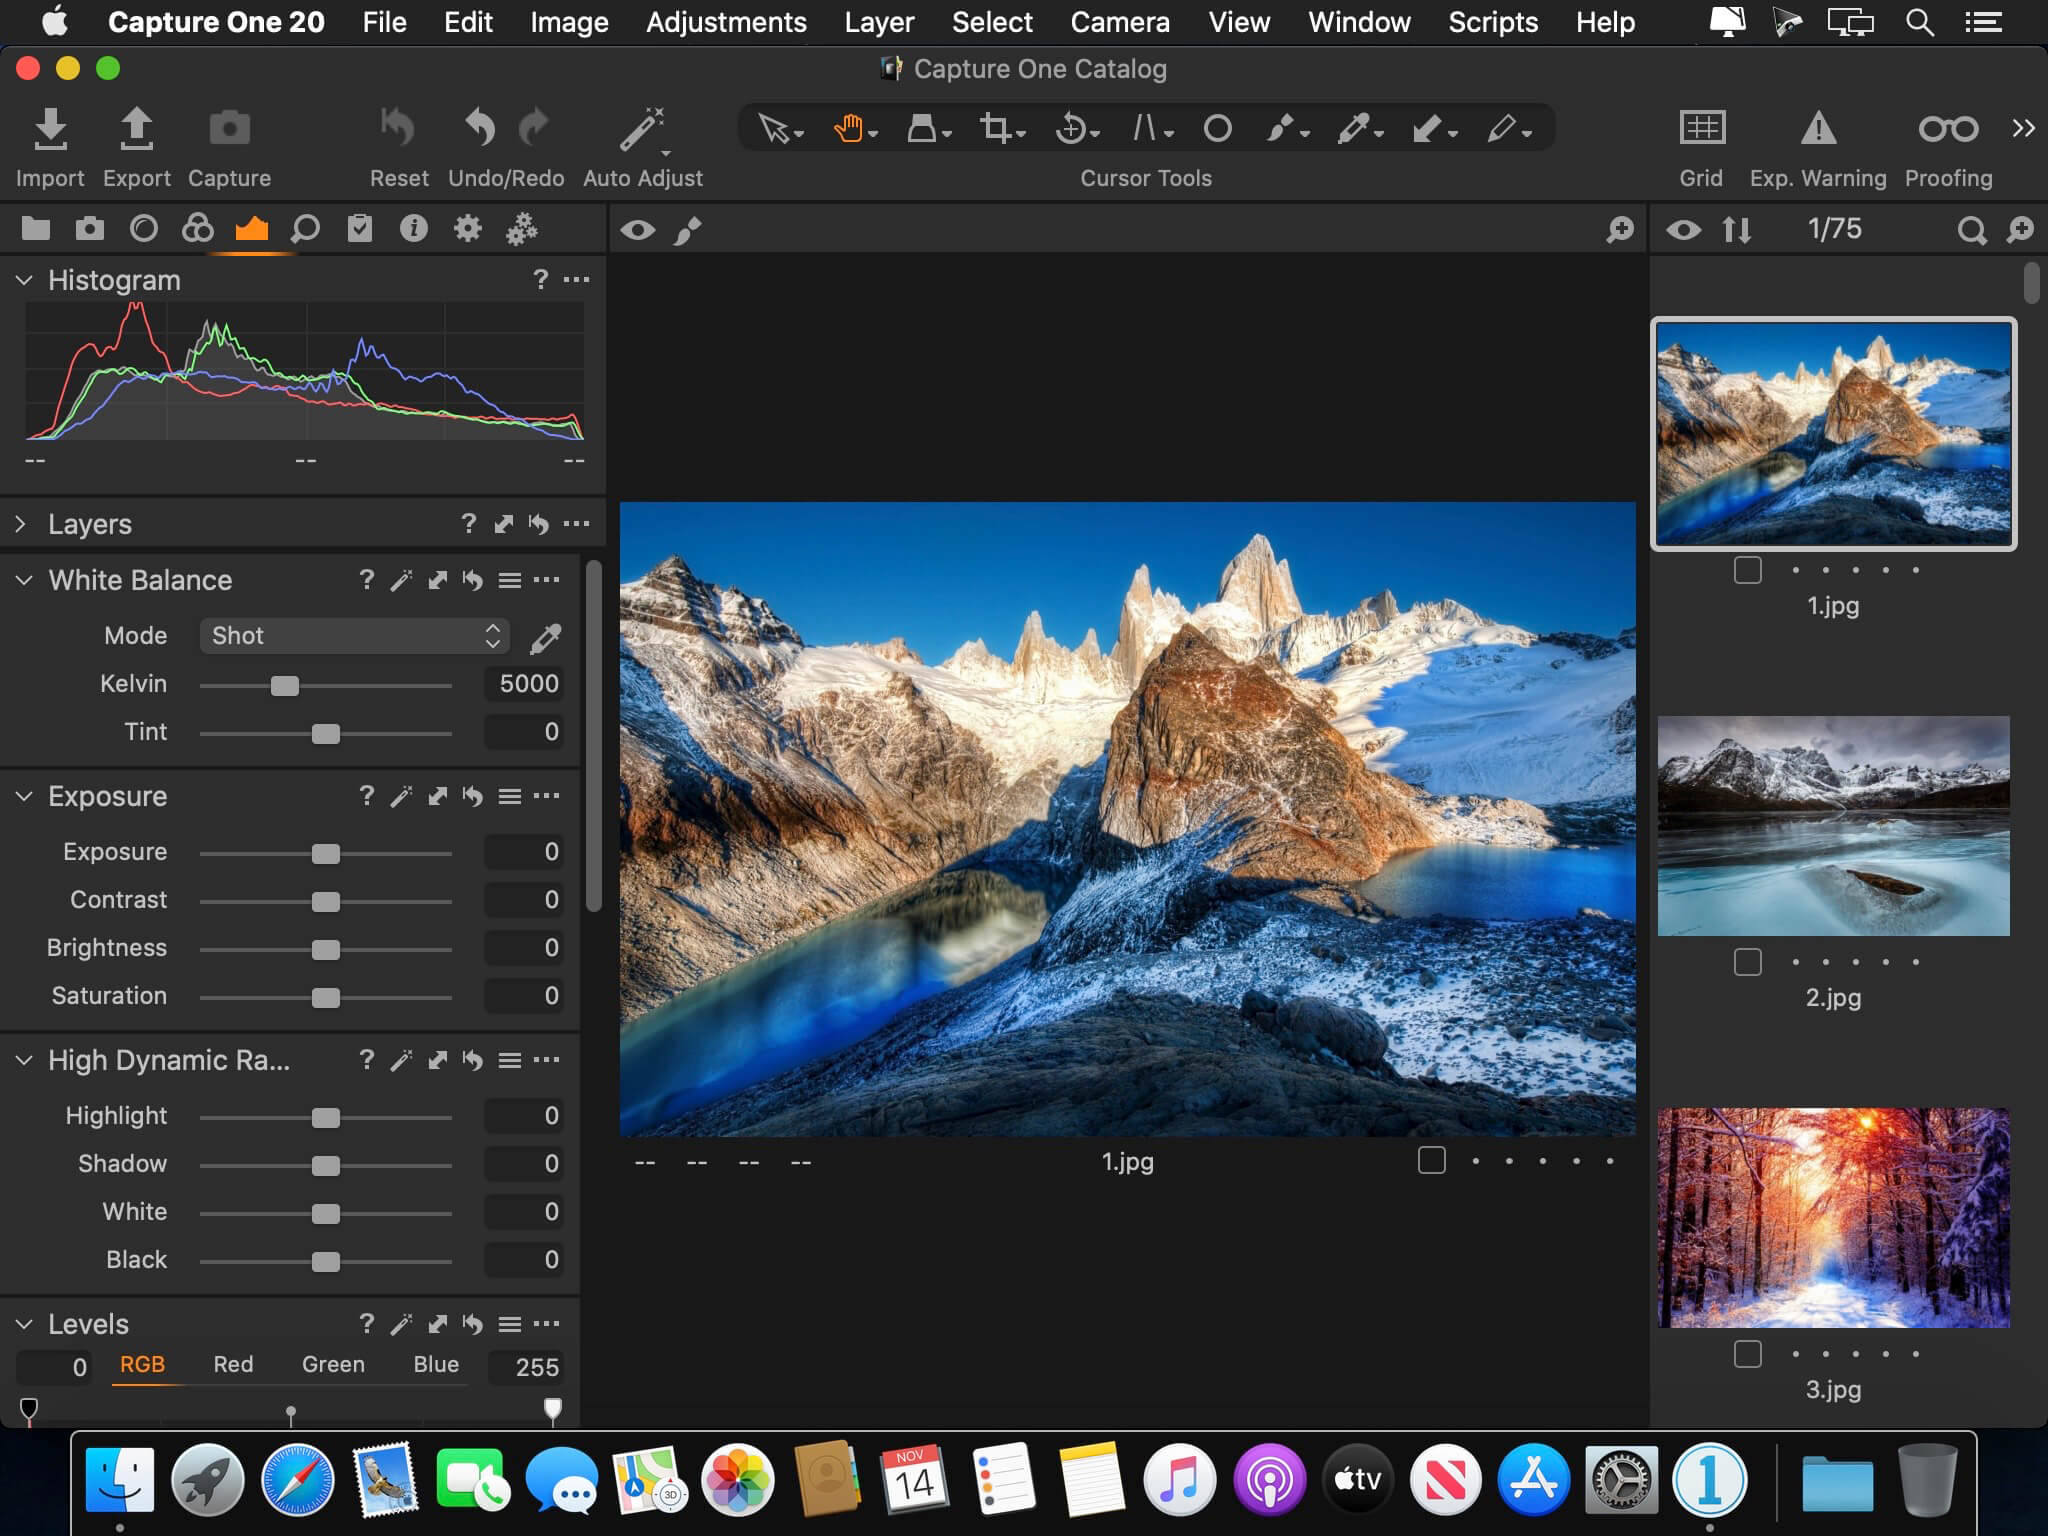 download the last version for apple Capture One 23 Pro